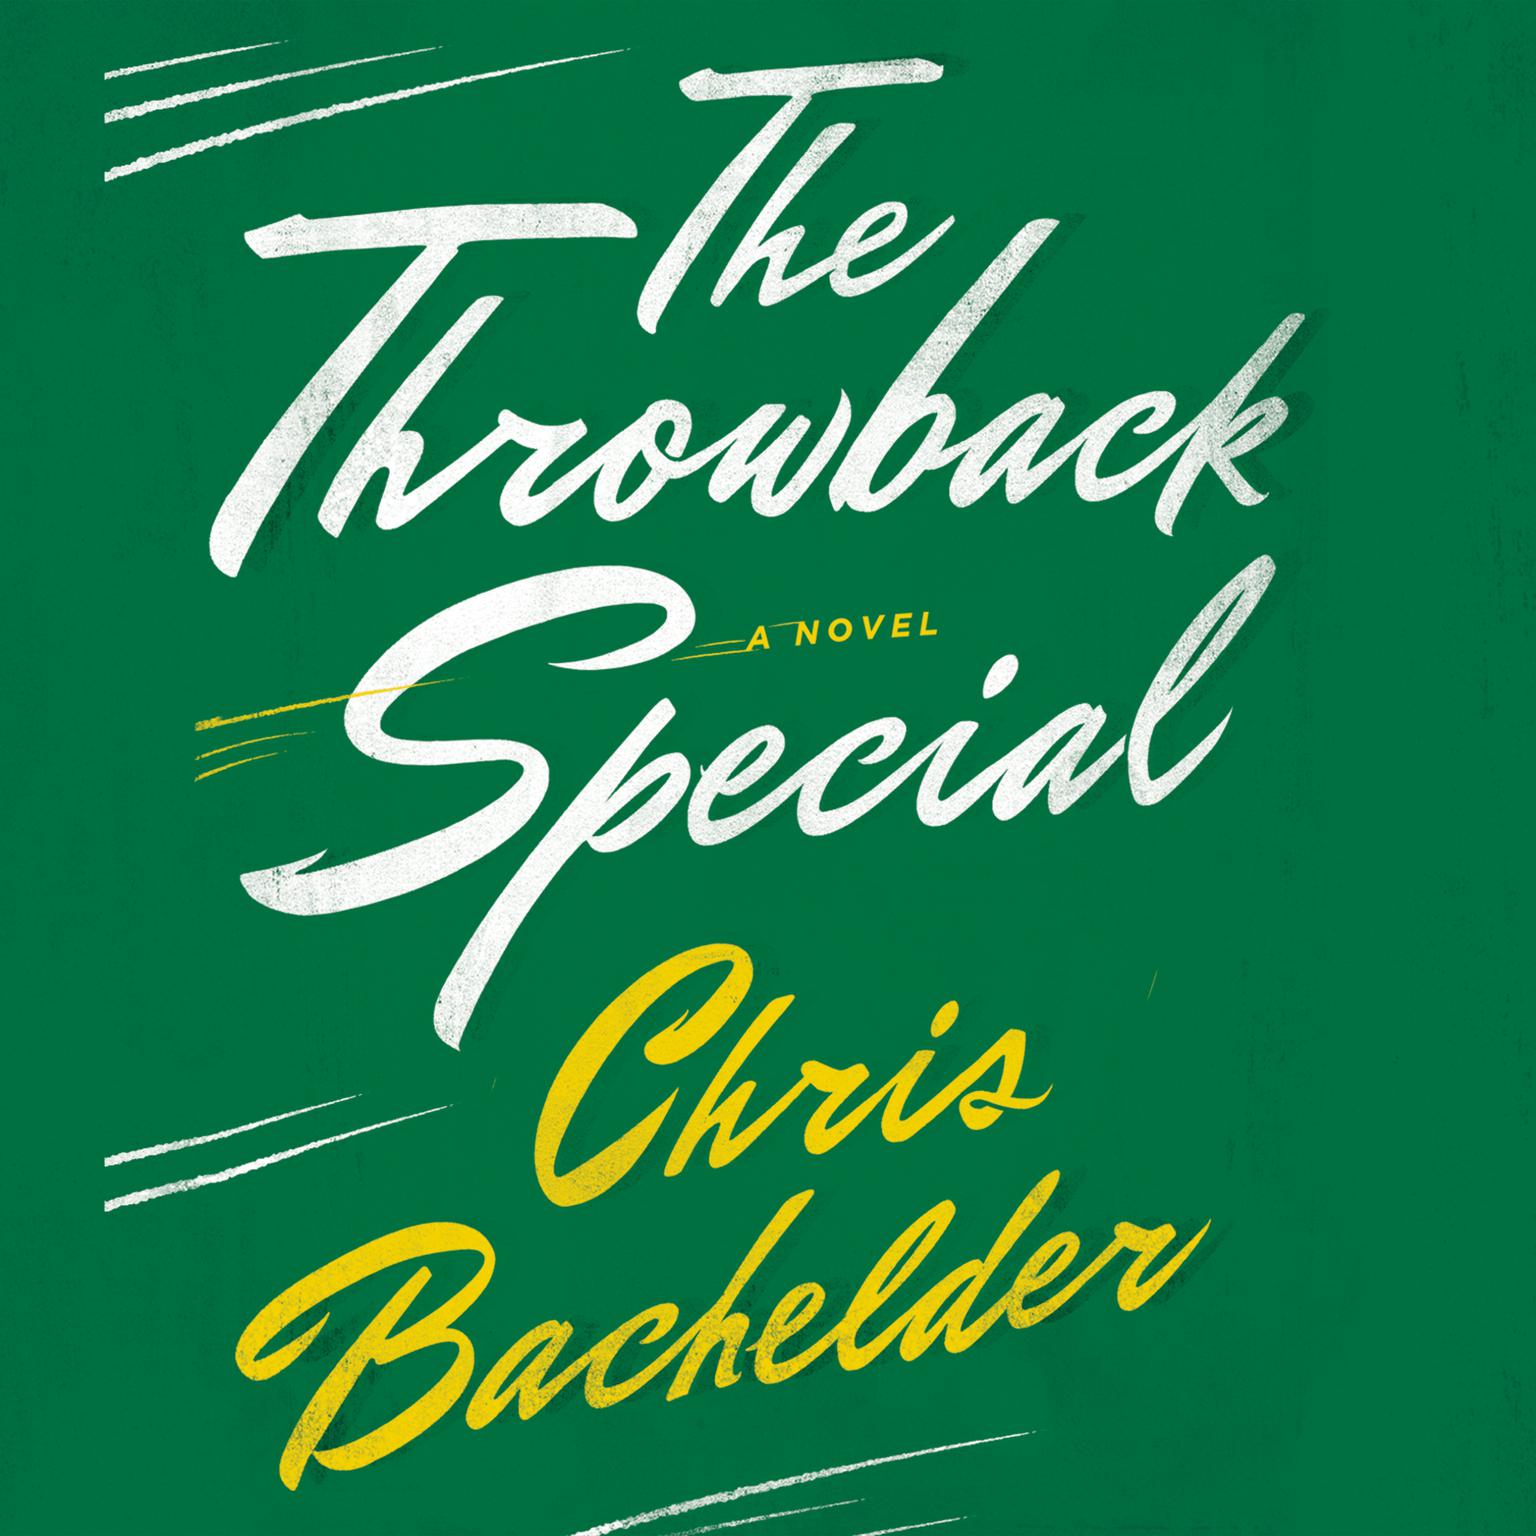 The Throwback Special Audiobook, by Chris Bachelder